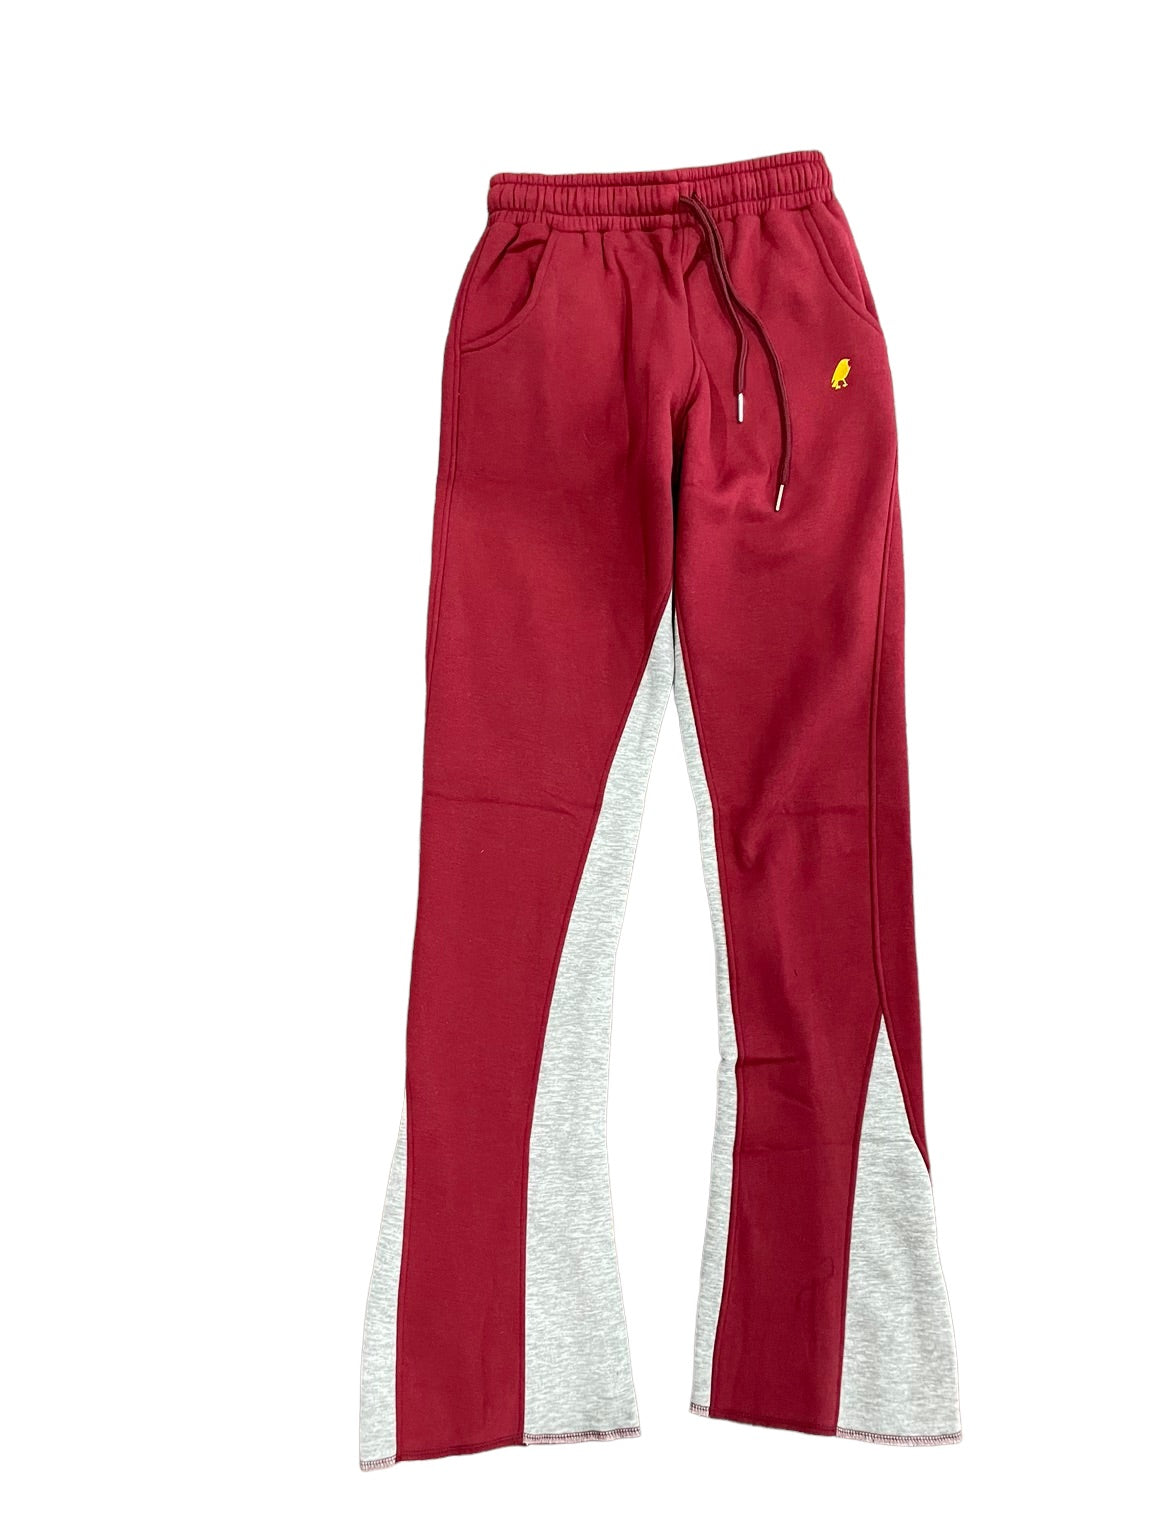 Women's Red Flare